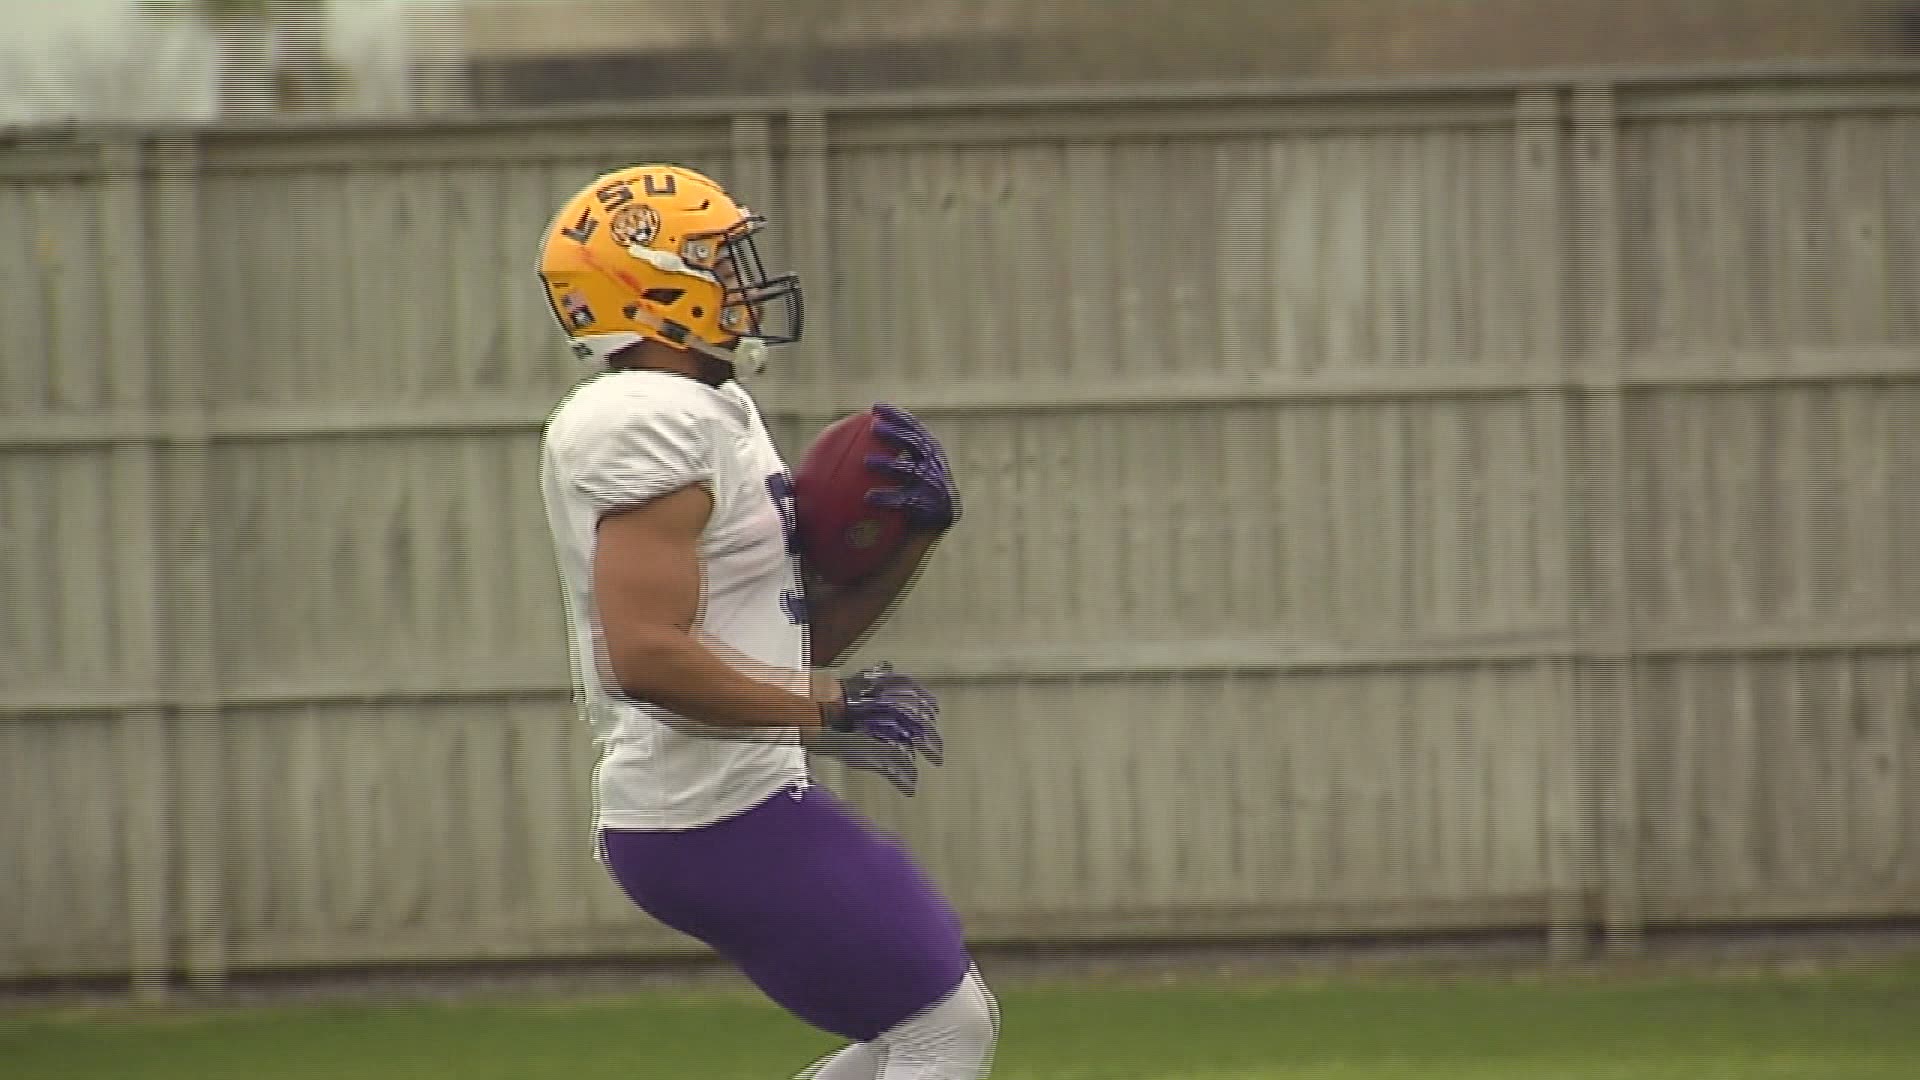 Derrius Guice fall practice prior to 2017 season with LSU